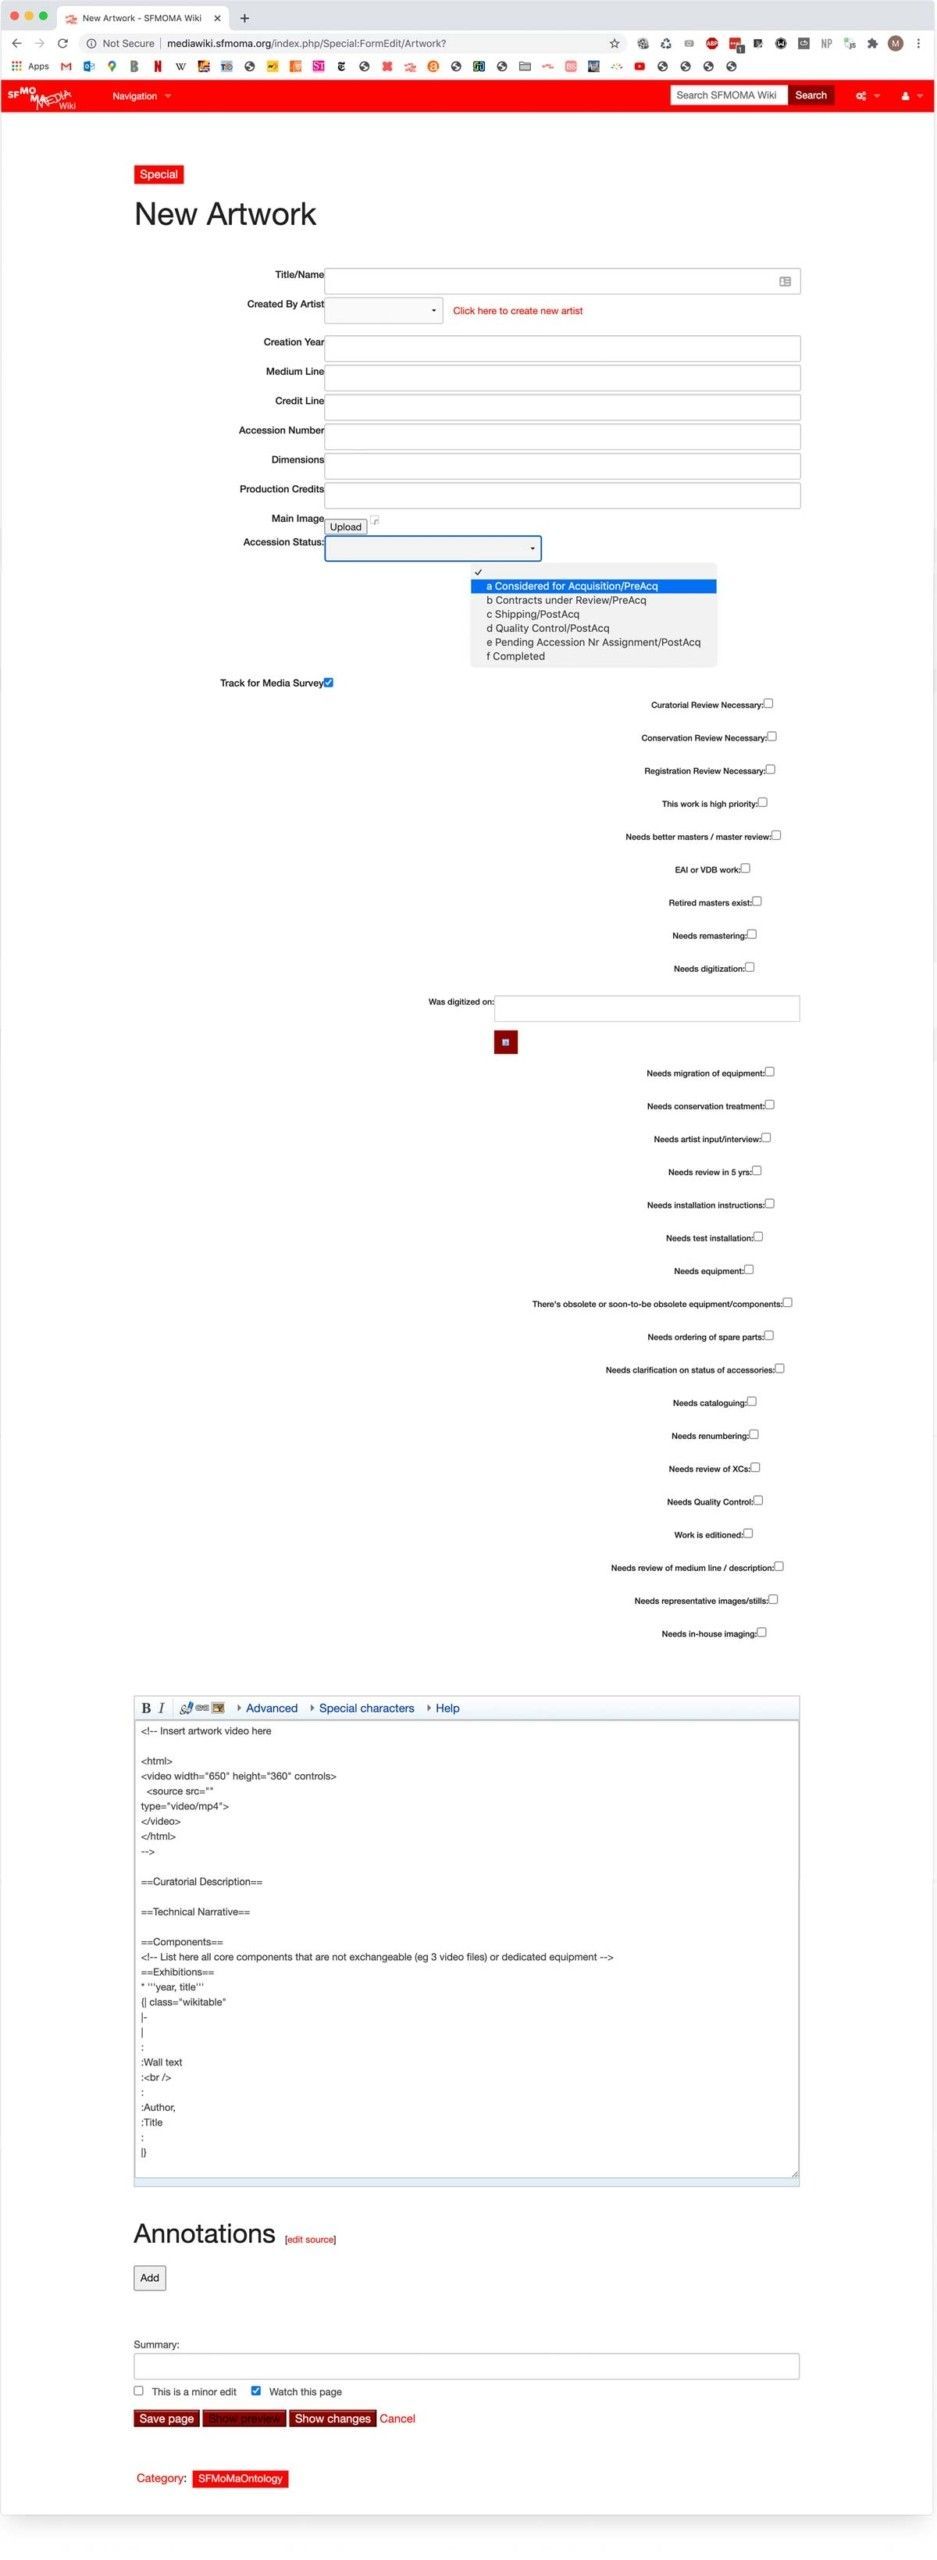 Figure 7. View of the artwork page form in the MediaWiki, which allows tracking media survey data and accession status. All entries are converted into semantic statements upon saving, which can be retrieved via semantic query.